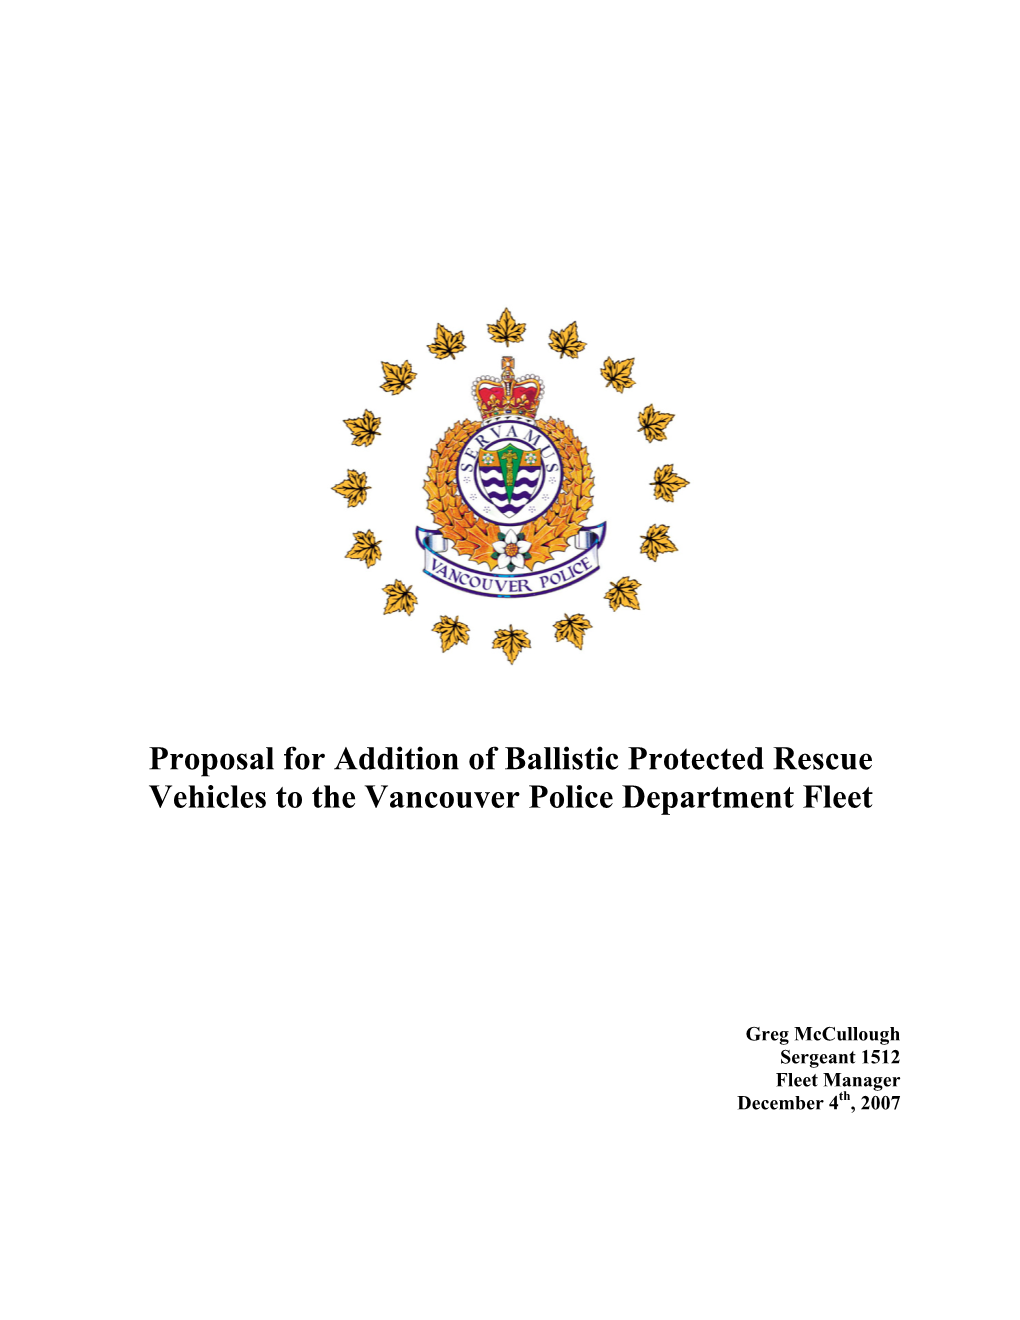 Proposal for Addition of Ballistic Protected Rescue Vehicles to the Vancouver Police Department Fleet